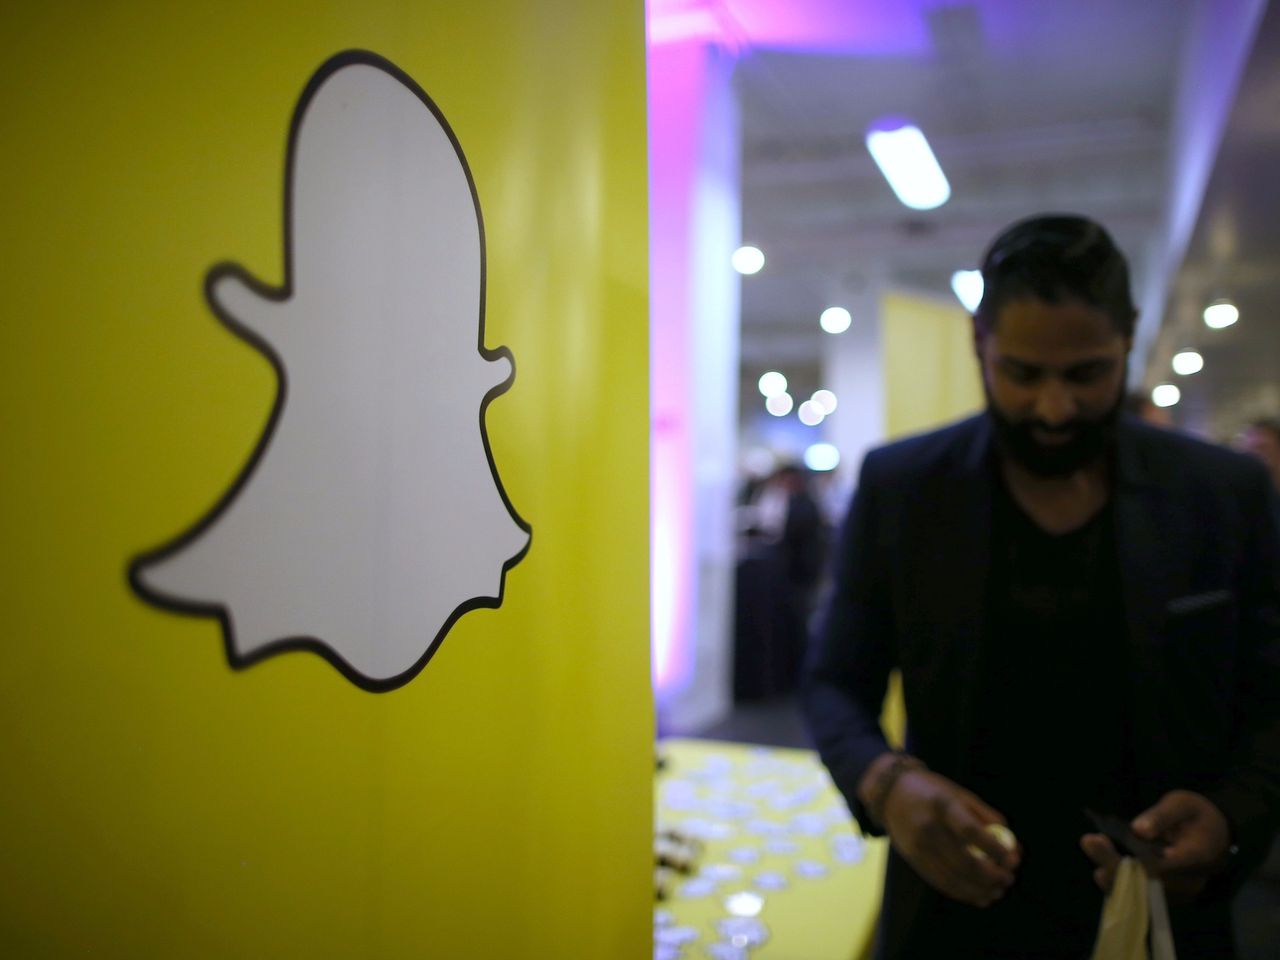 snapchat-bought-a-company-to-help-advertisers-track-people-in-the-real-world